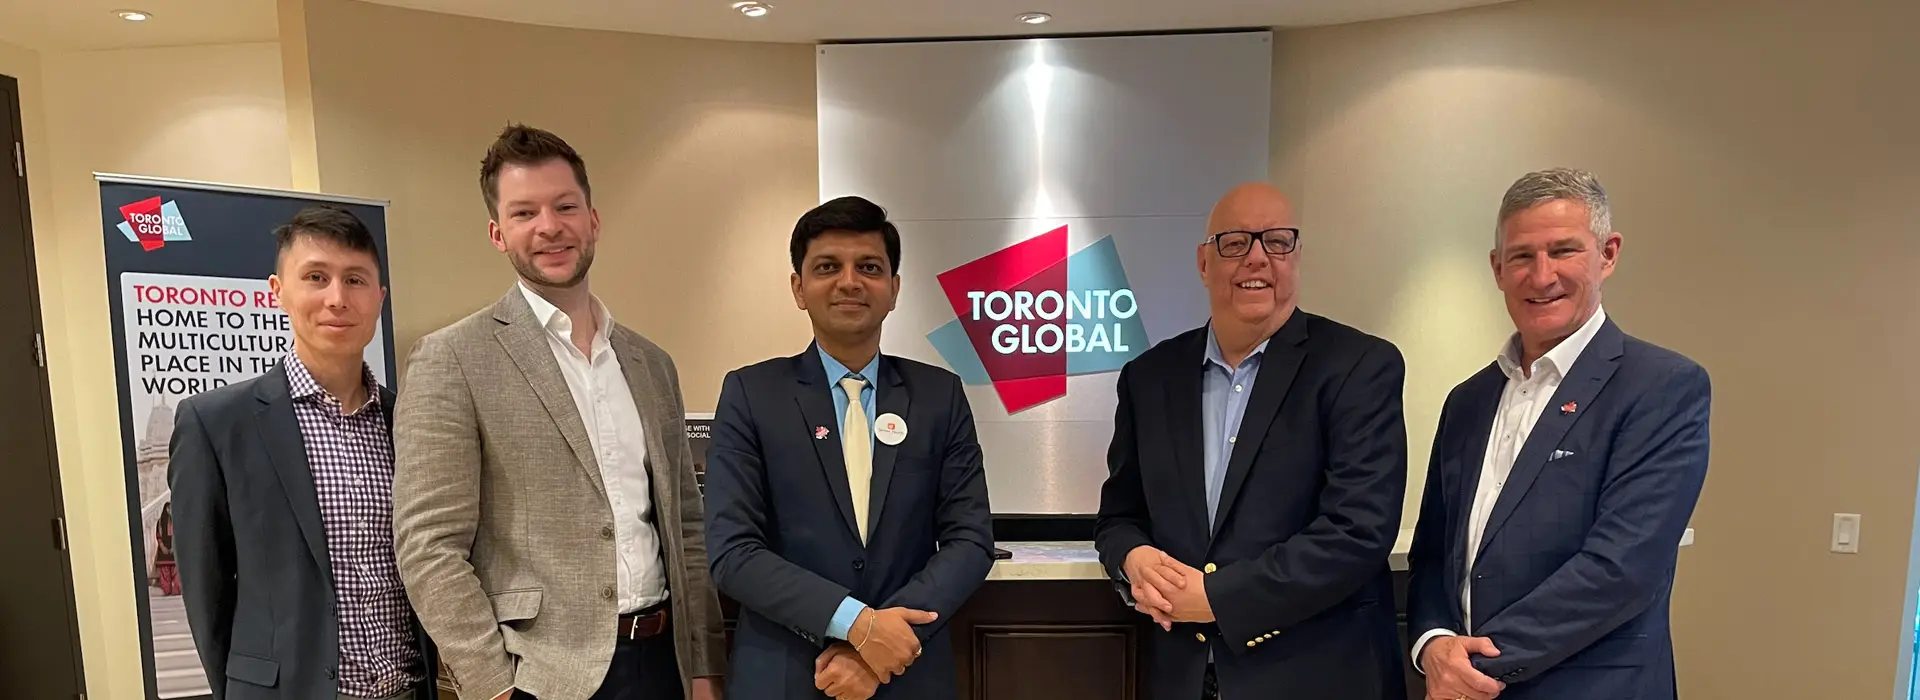 Silver Touch Technologies Lands in York Region to Strengthen North American Presence